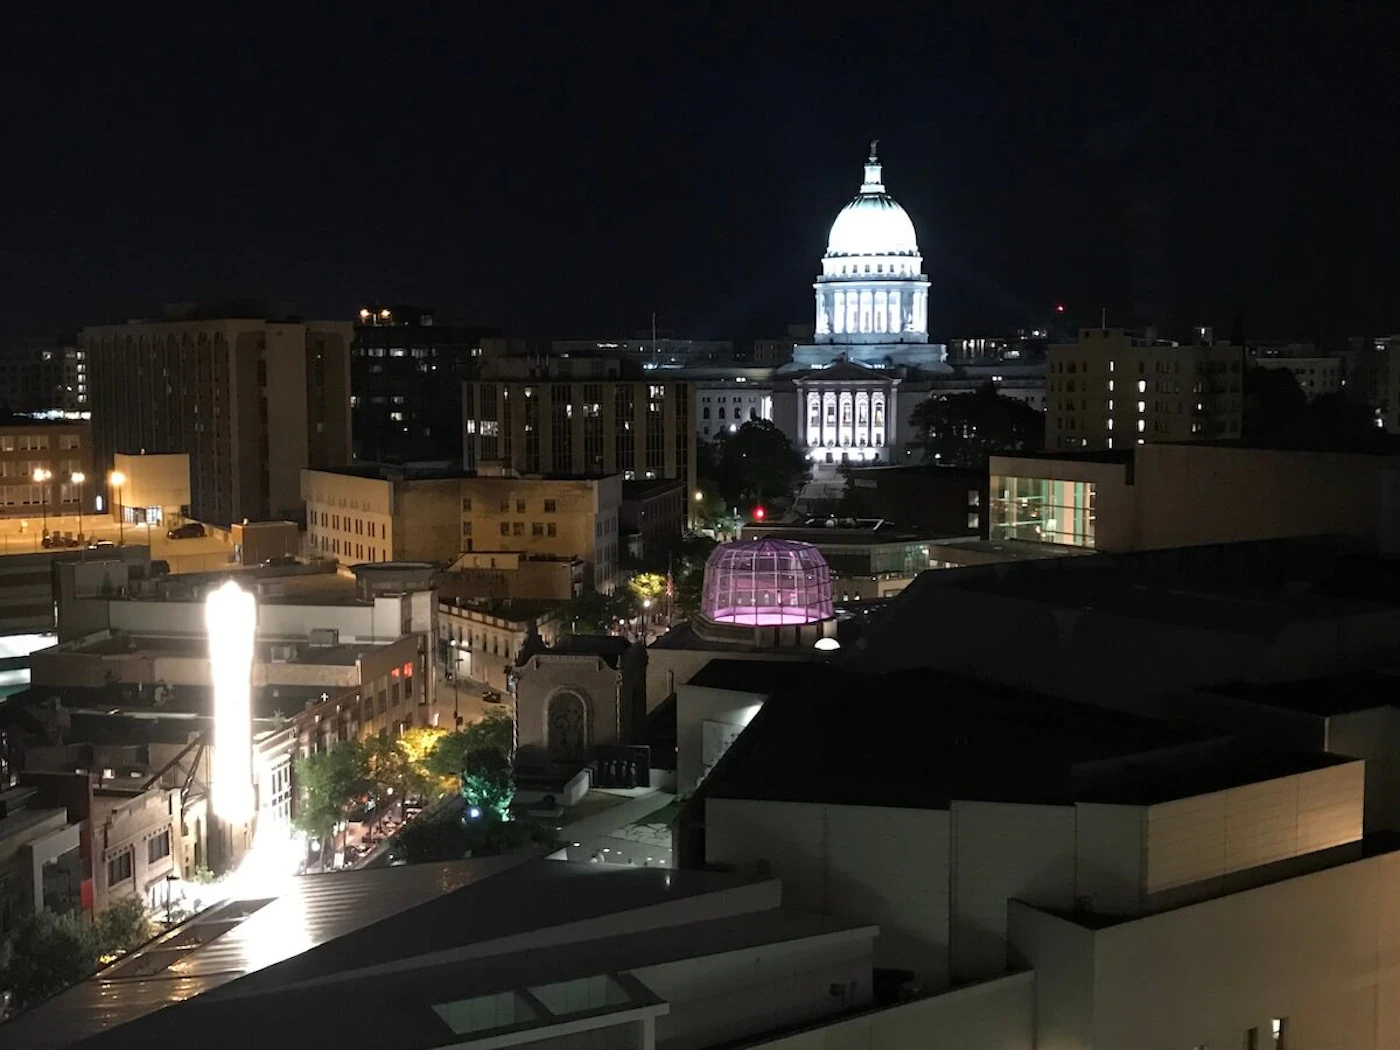 Overlooking State Street, the west wing of the Capitol building contains the Assembly chamber where Gov. Evers will deliver Wednesday night's "State of the State" address. (Photo by Pat Kreitlow)